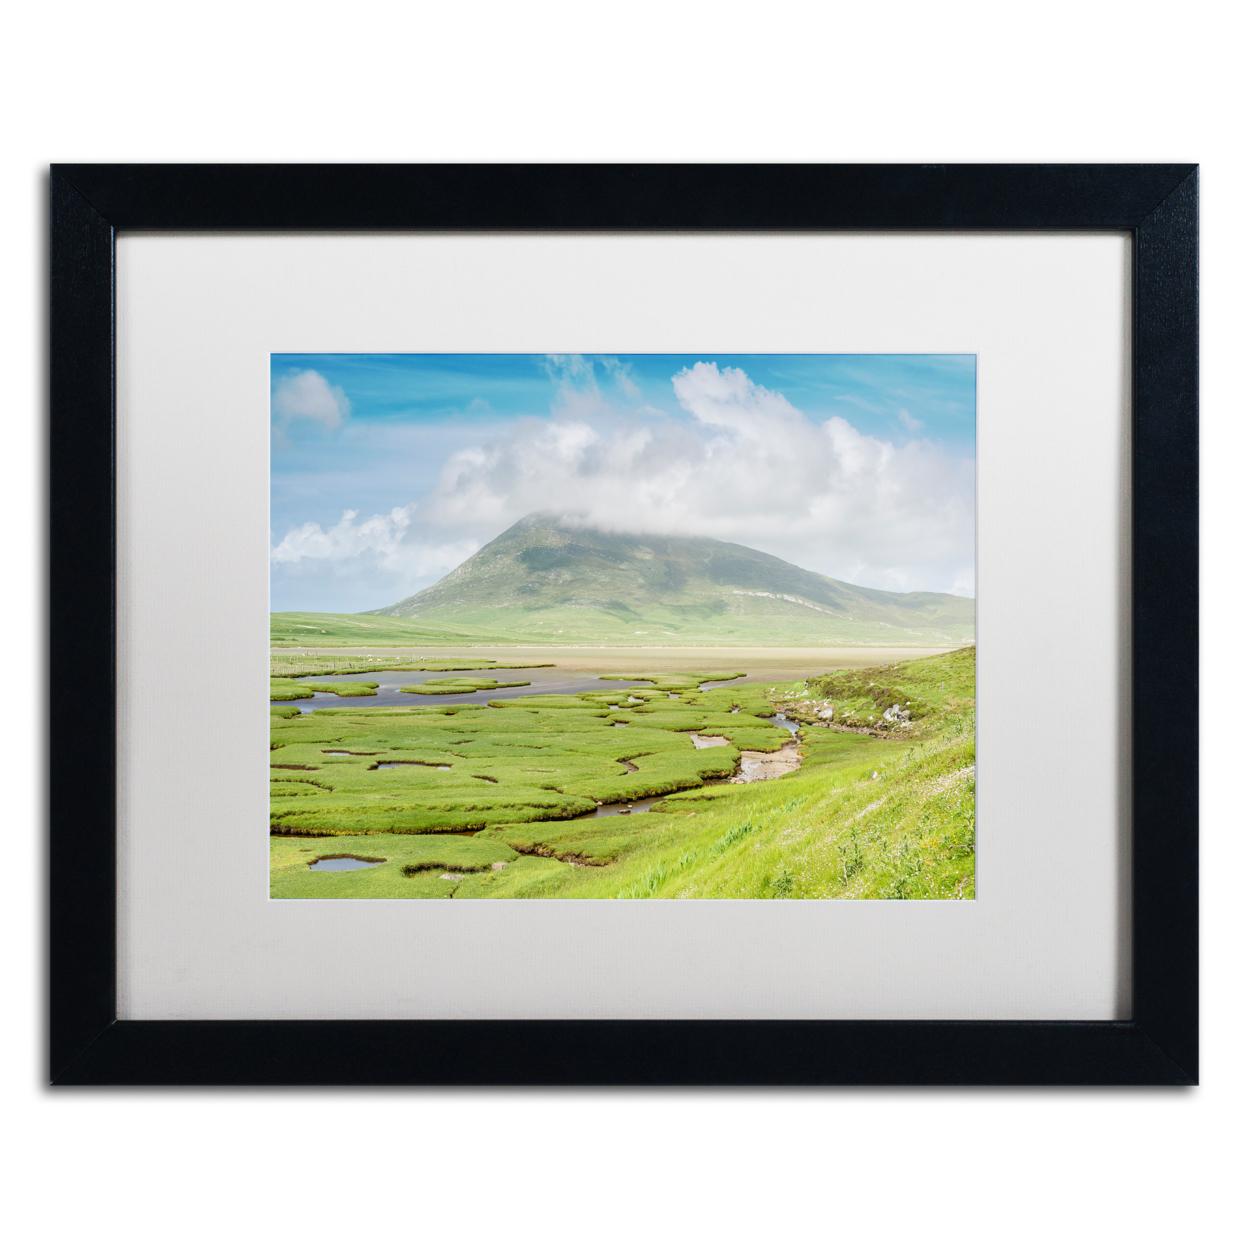 Michael Blanchette Photography 'The Harris Saltings' Black Wooden Framed Art 18 X 22 Inches